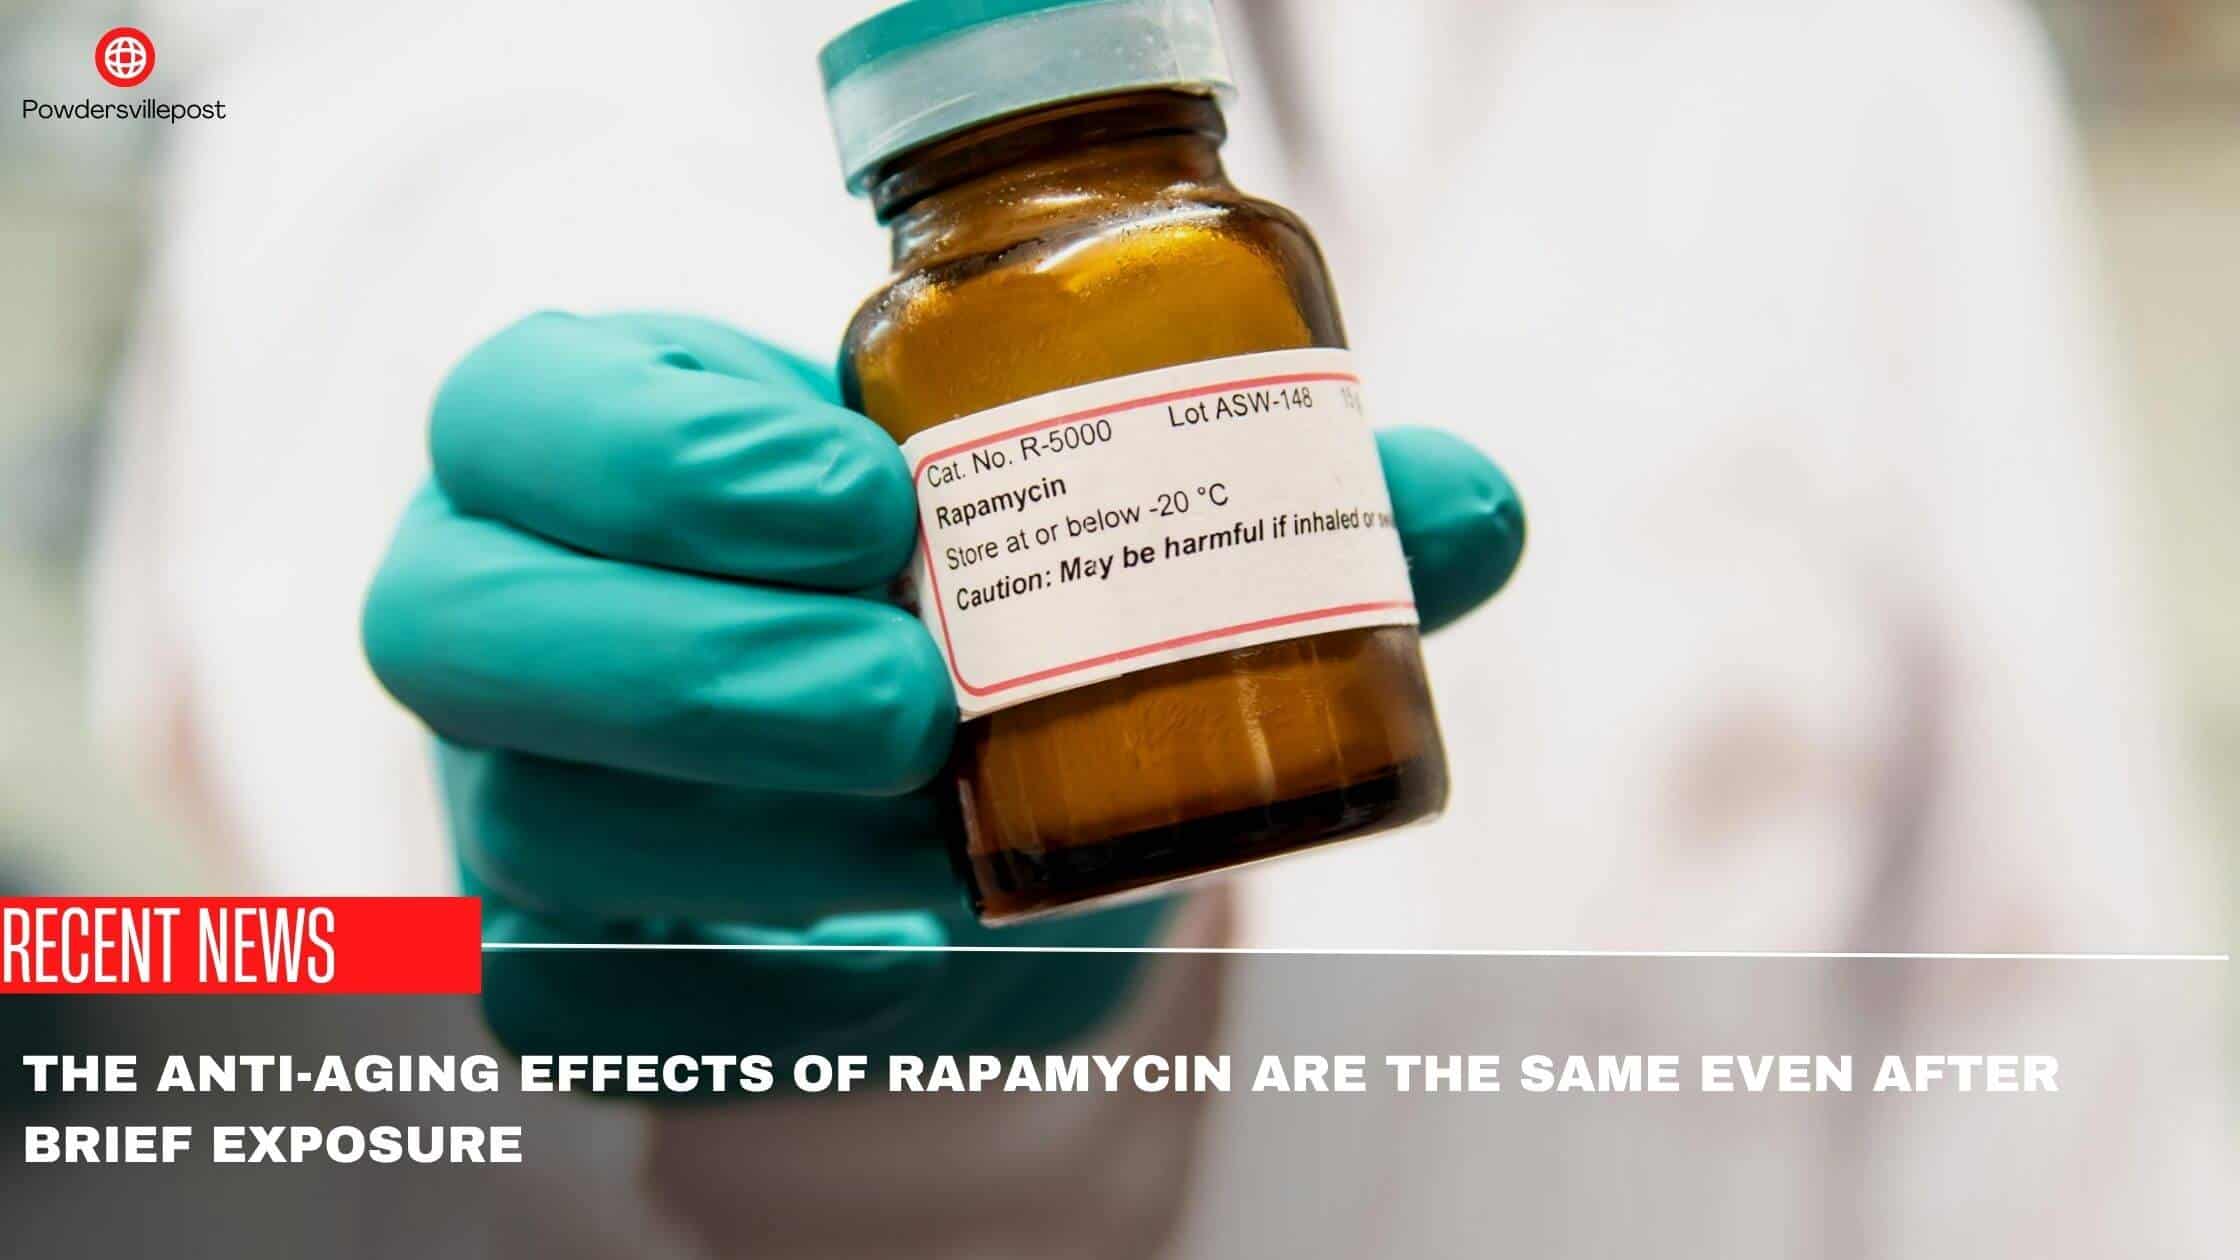 The Anti-Aging Effects Of Rapamycin Are The Same Even After Brief Exposure